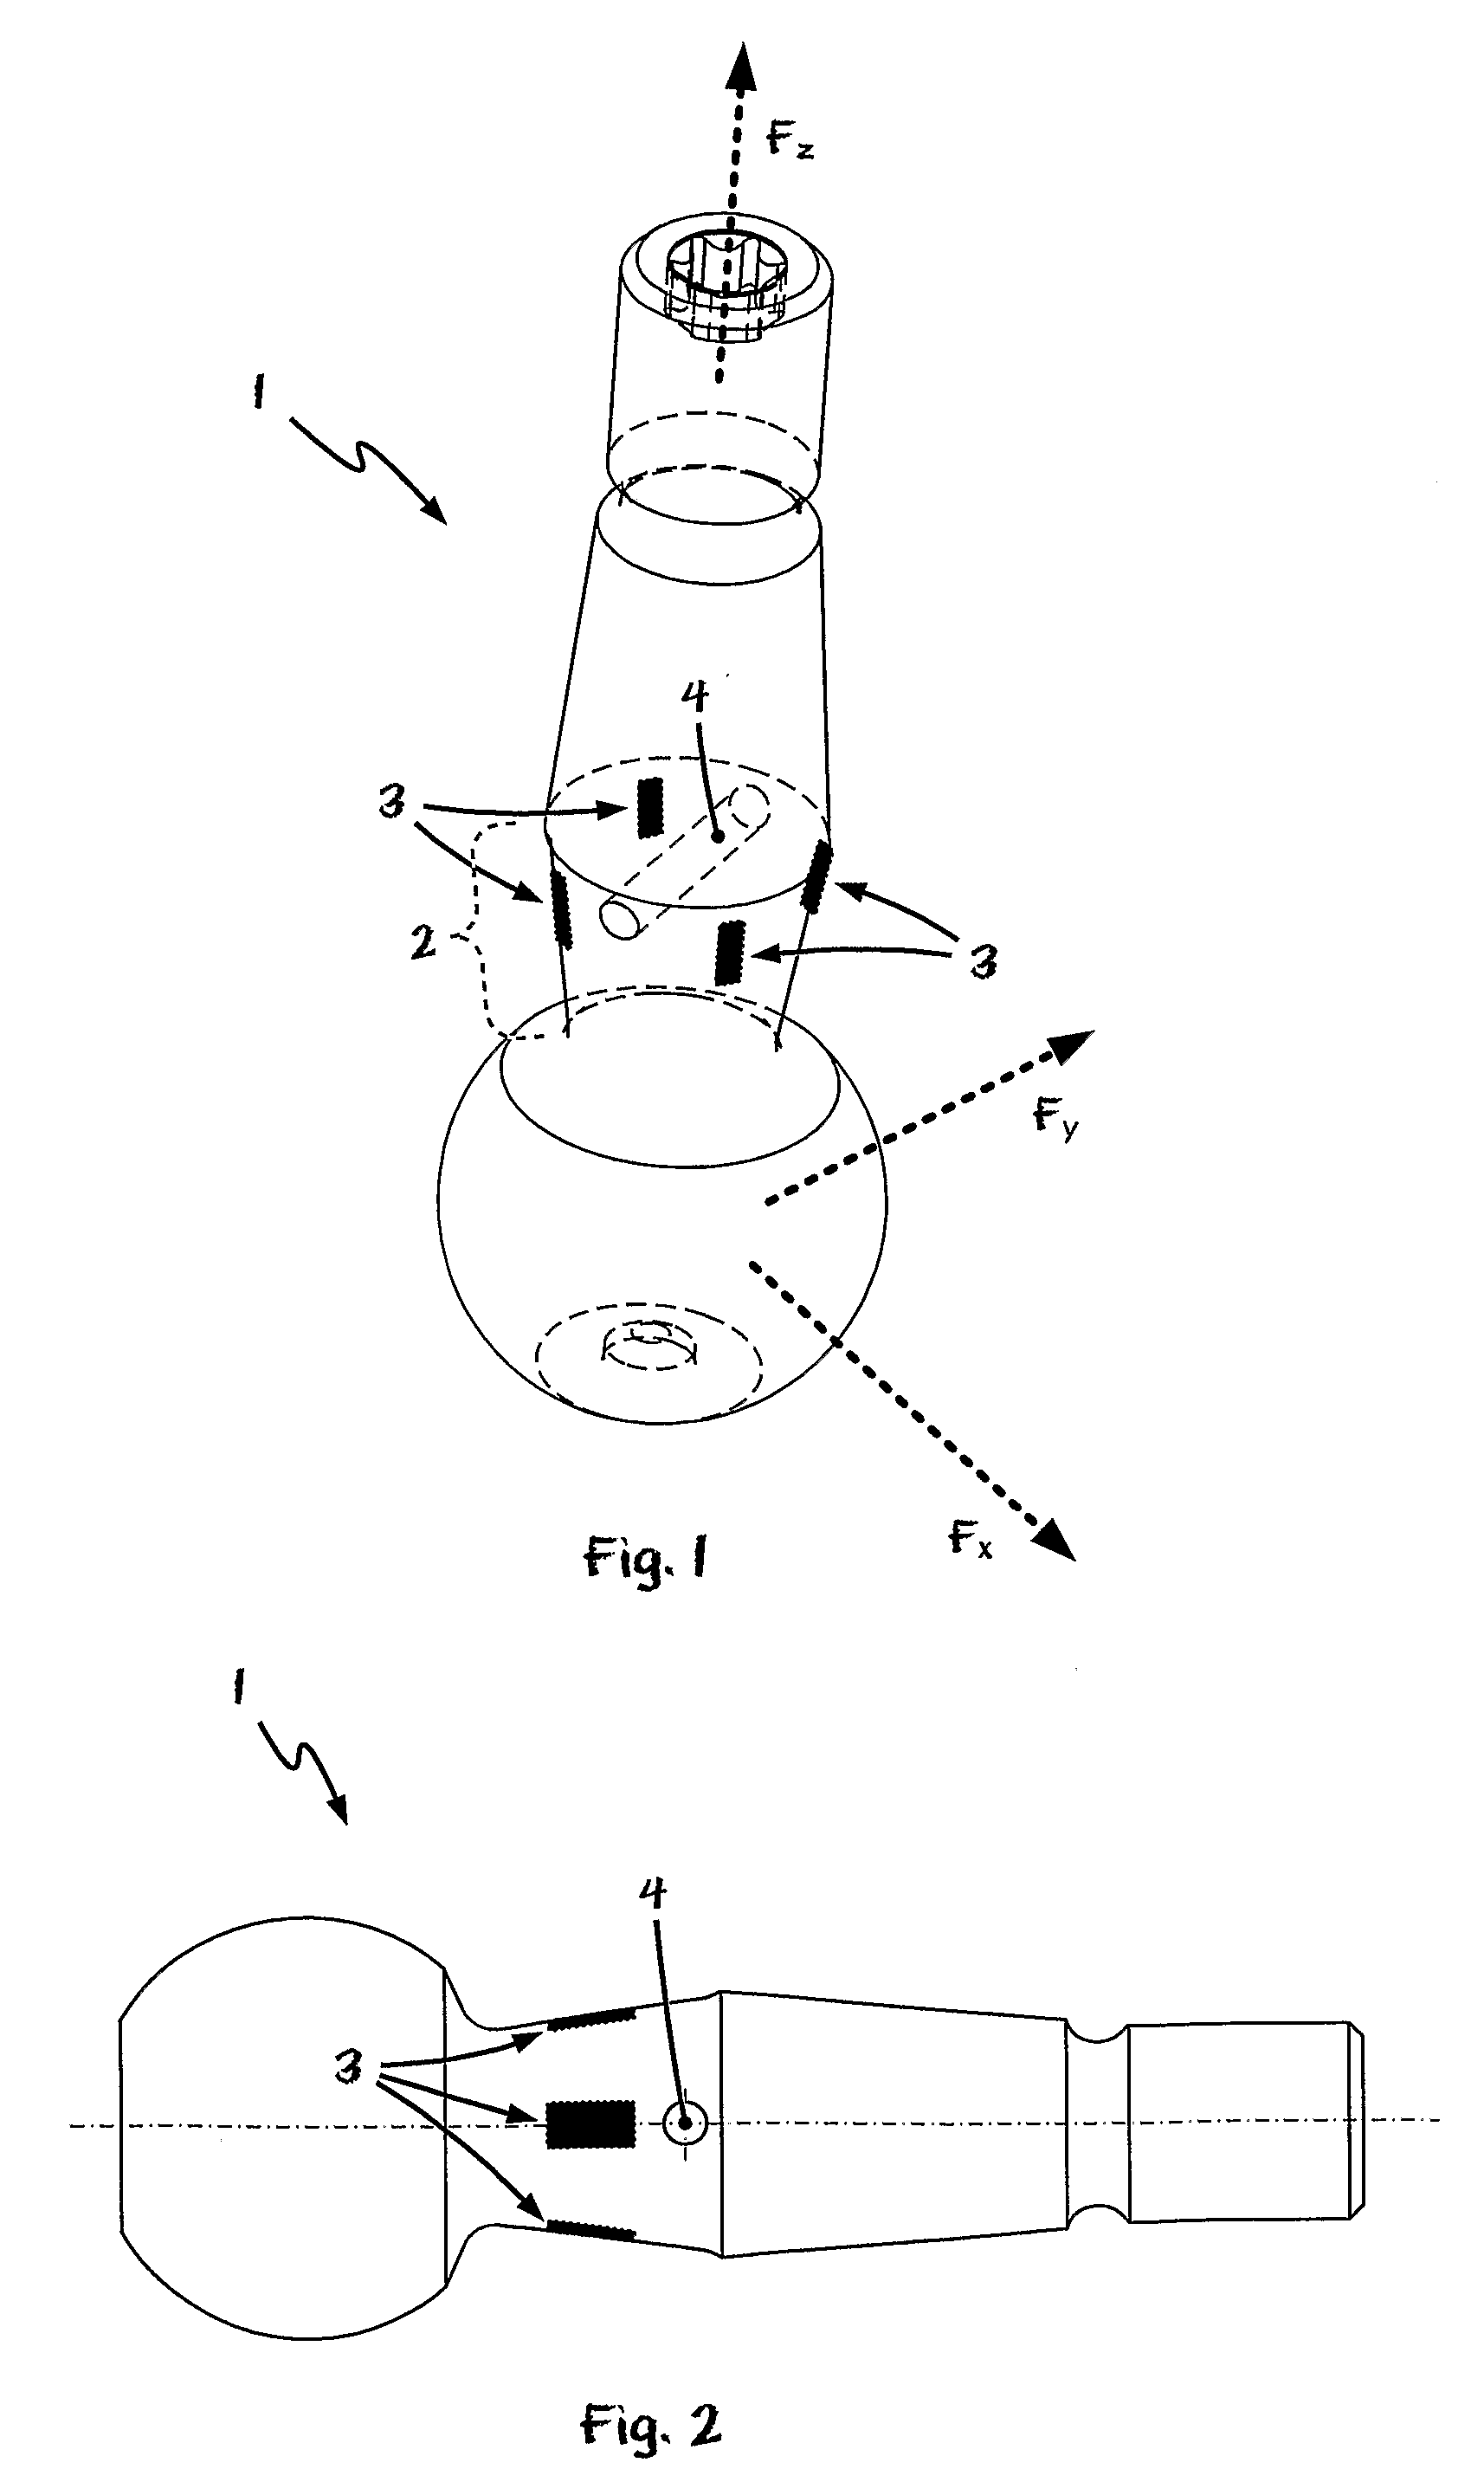 Load-Sensing System with at Least One Ball and Socket Joint